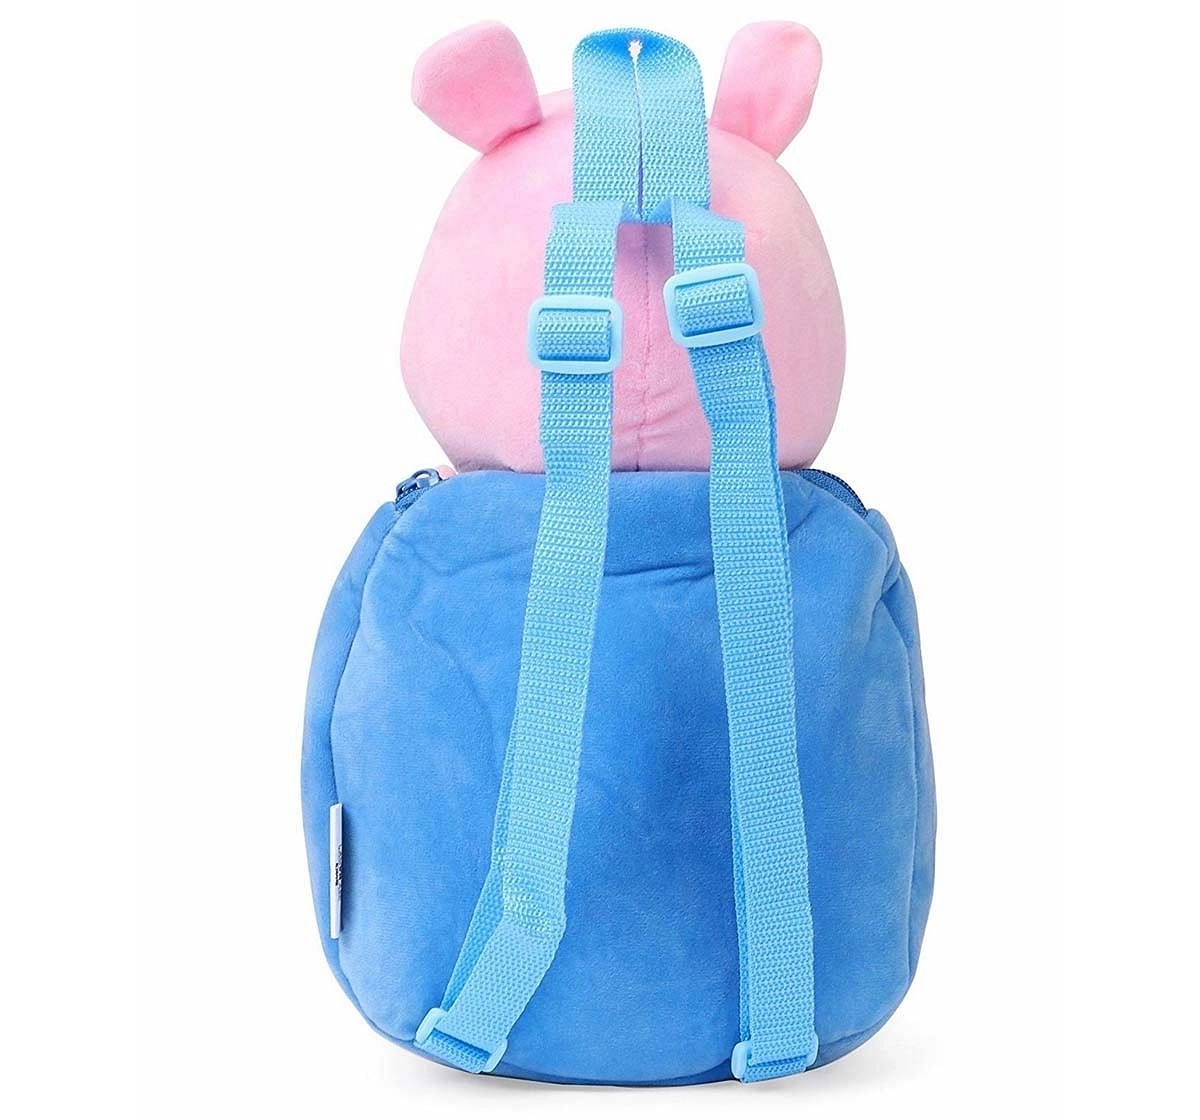 Peppa and George Pig Soft Toy Bag, Multi Color, 44 Cm Plush Accessories for Kids age 2Y+